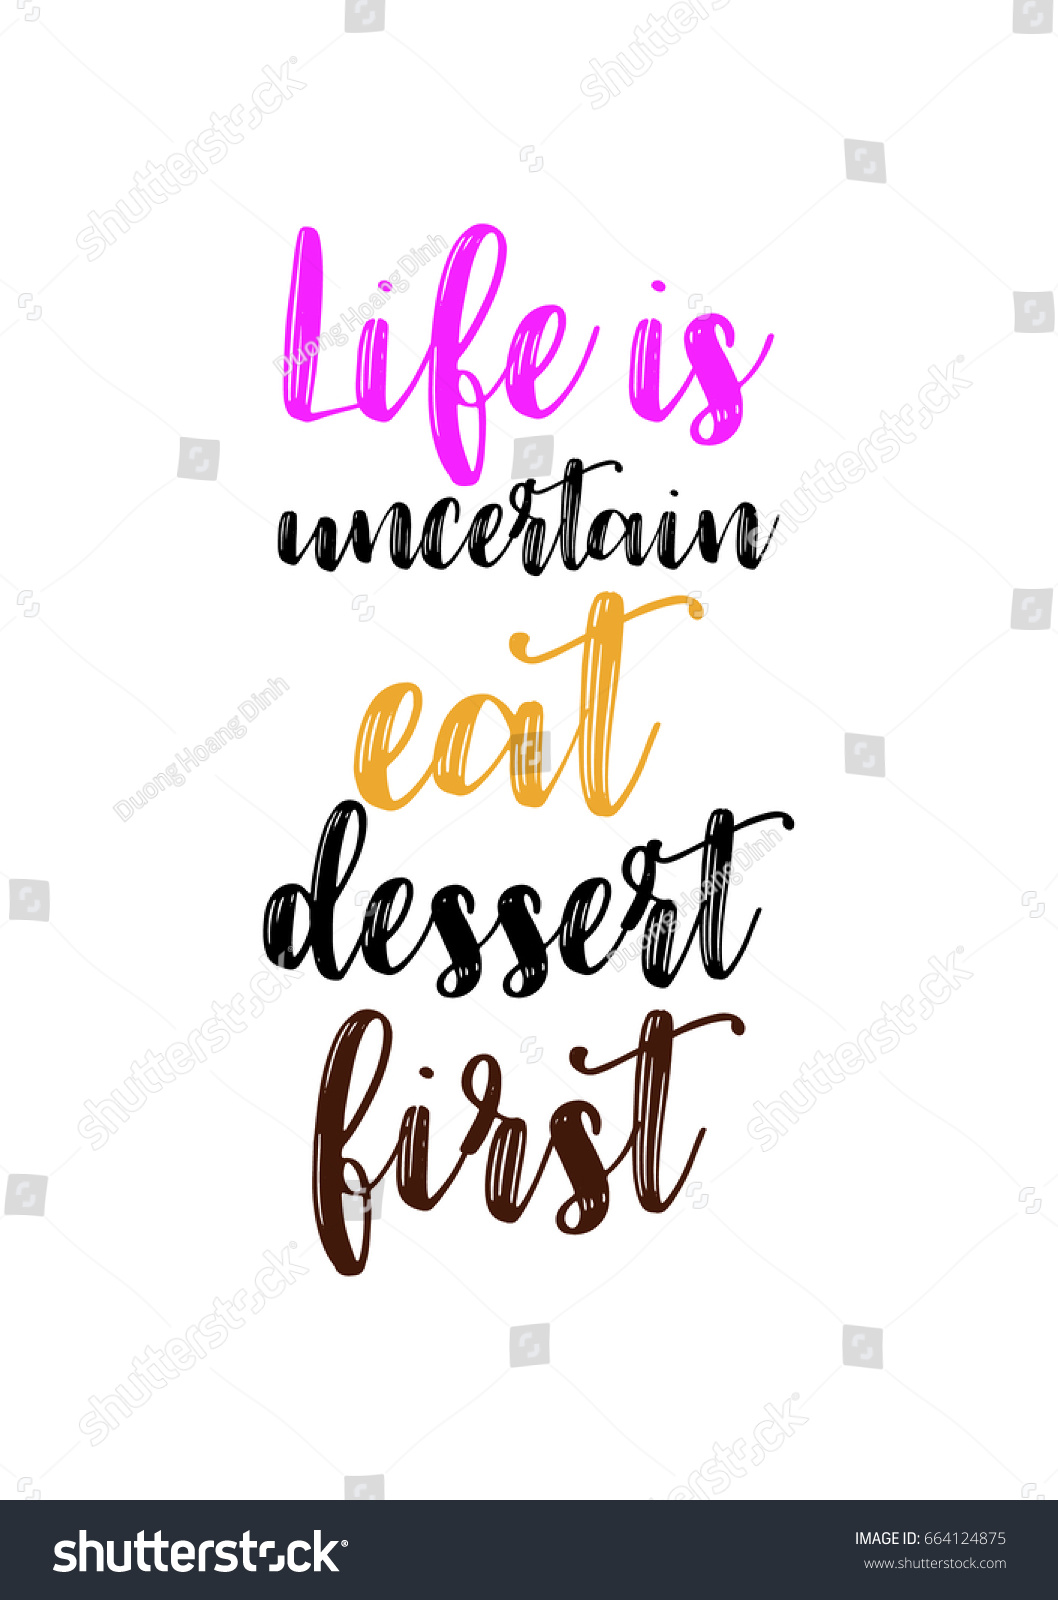 Quote food calligraphy style Hand lettering design element Inspirational quote Life is uncertain